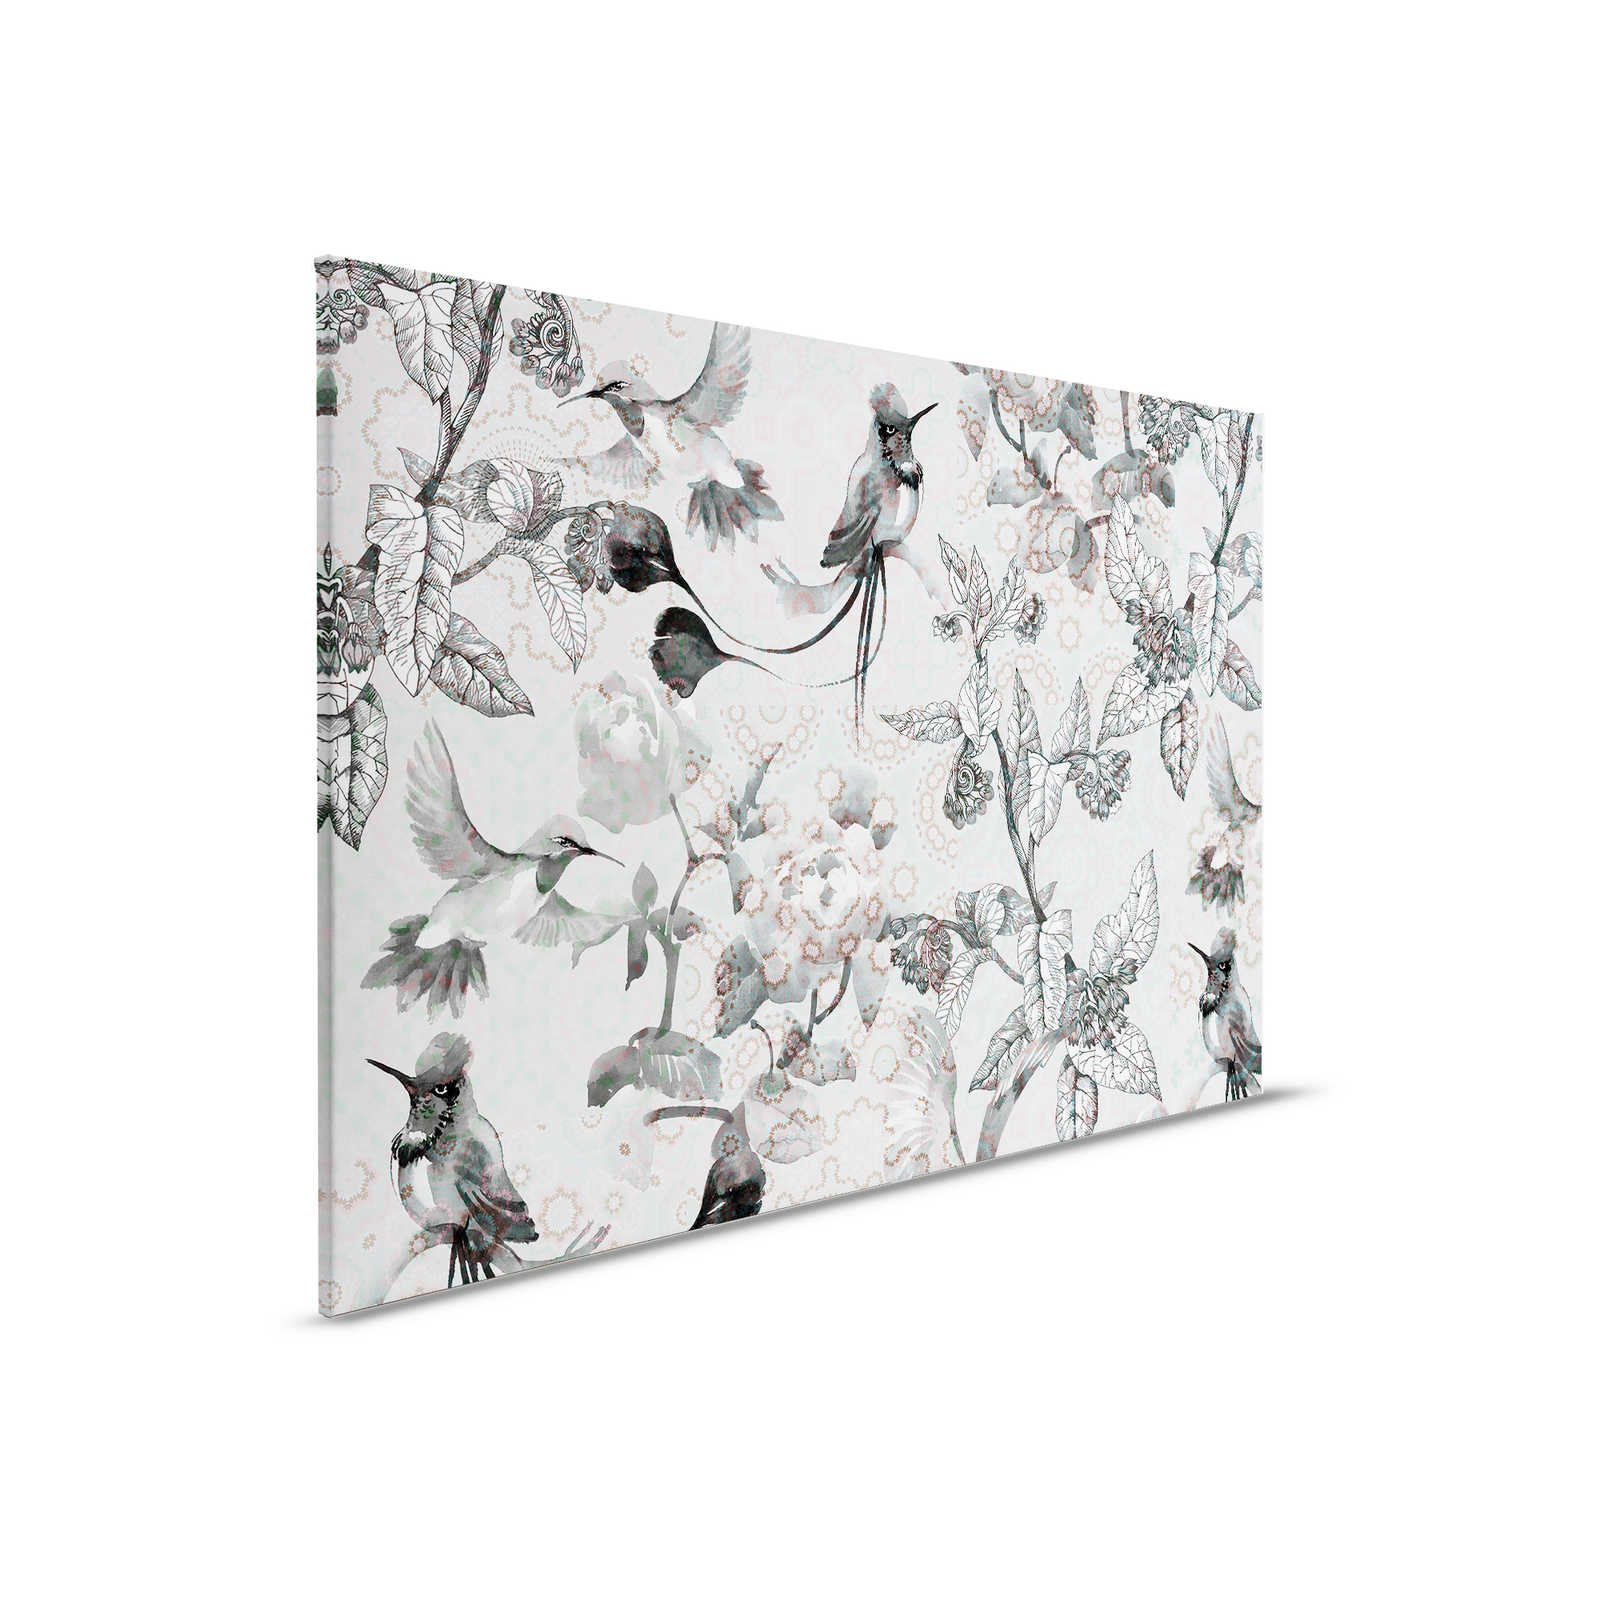         Canvas painting Nature Design in collage style | exotic mosaic 4 - 0,90 m x 0,60 m
    